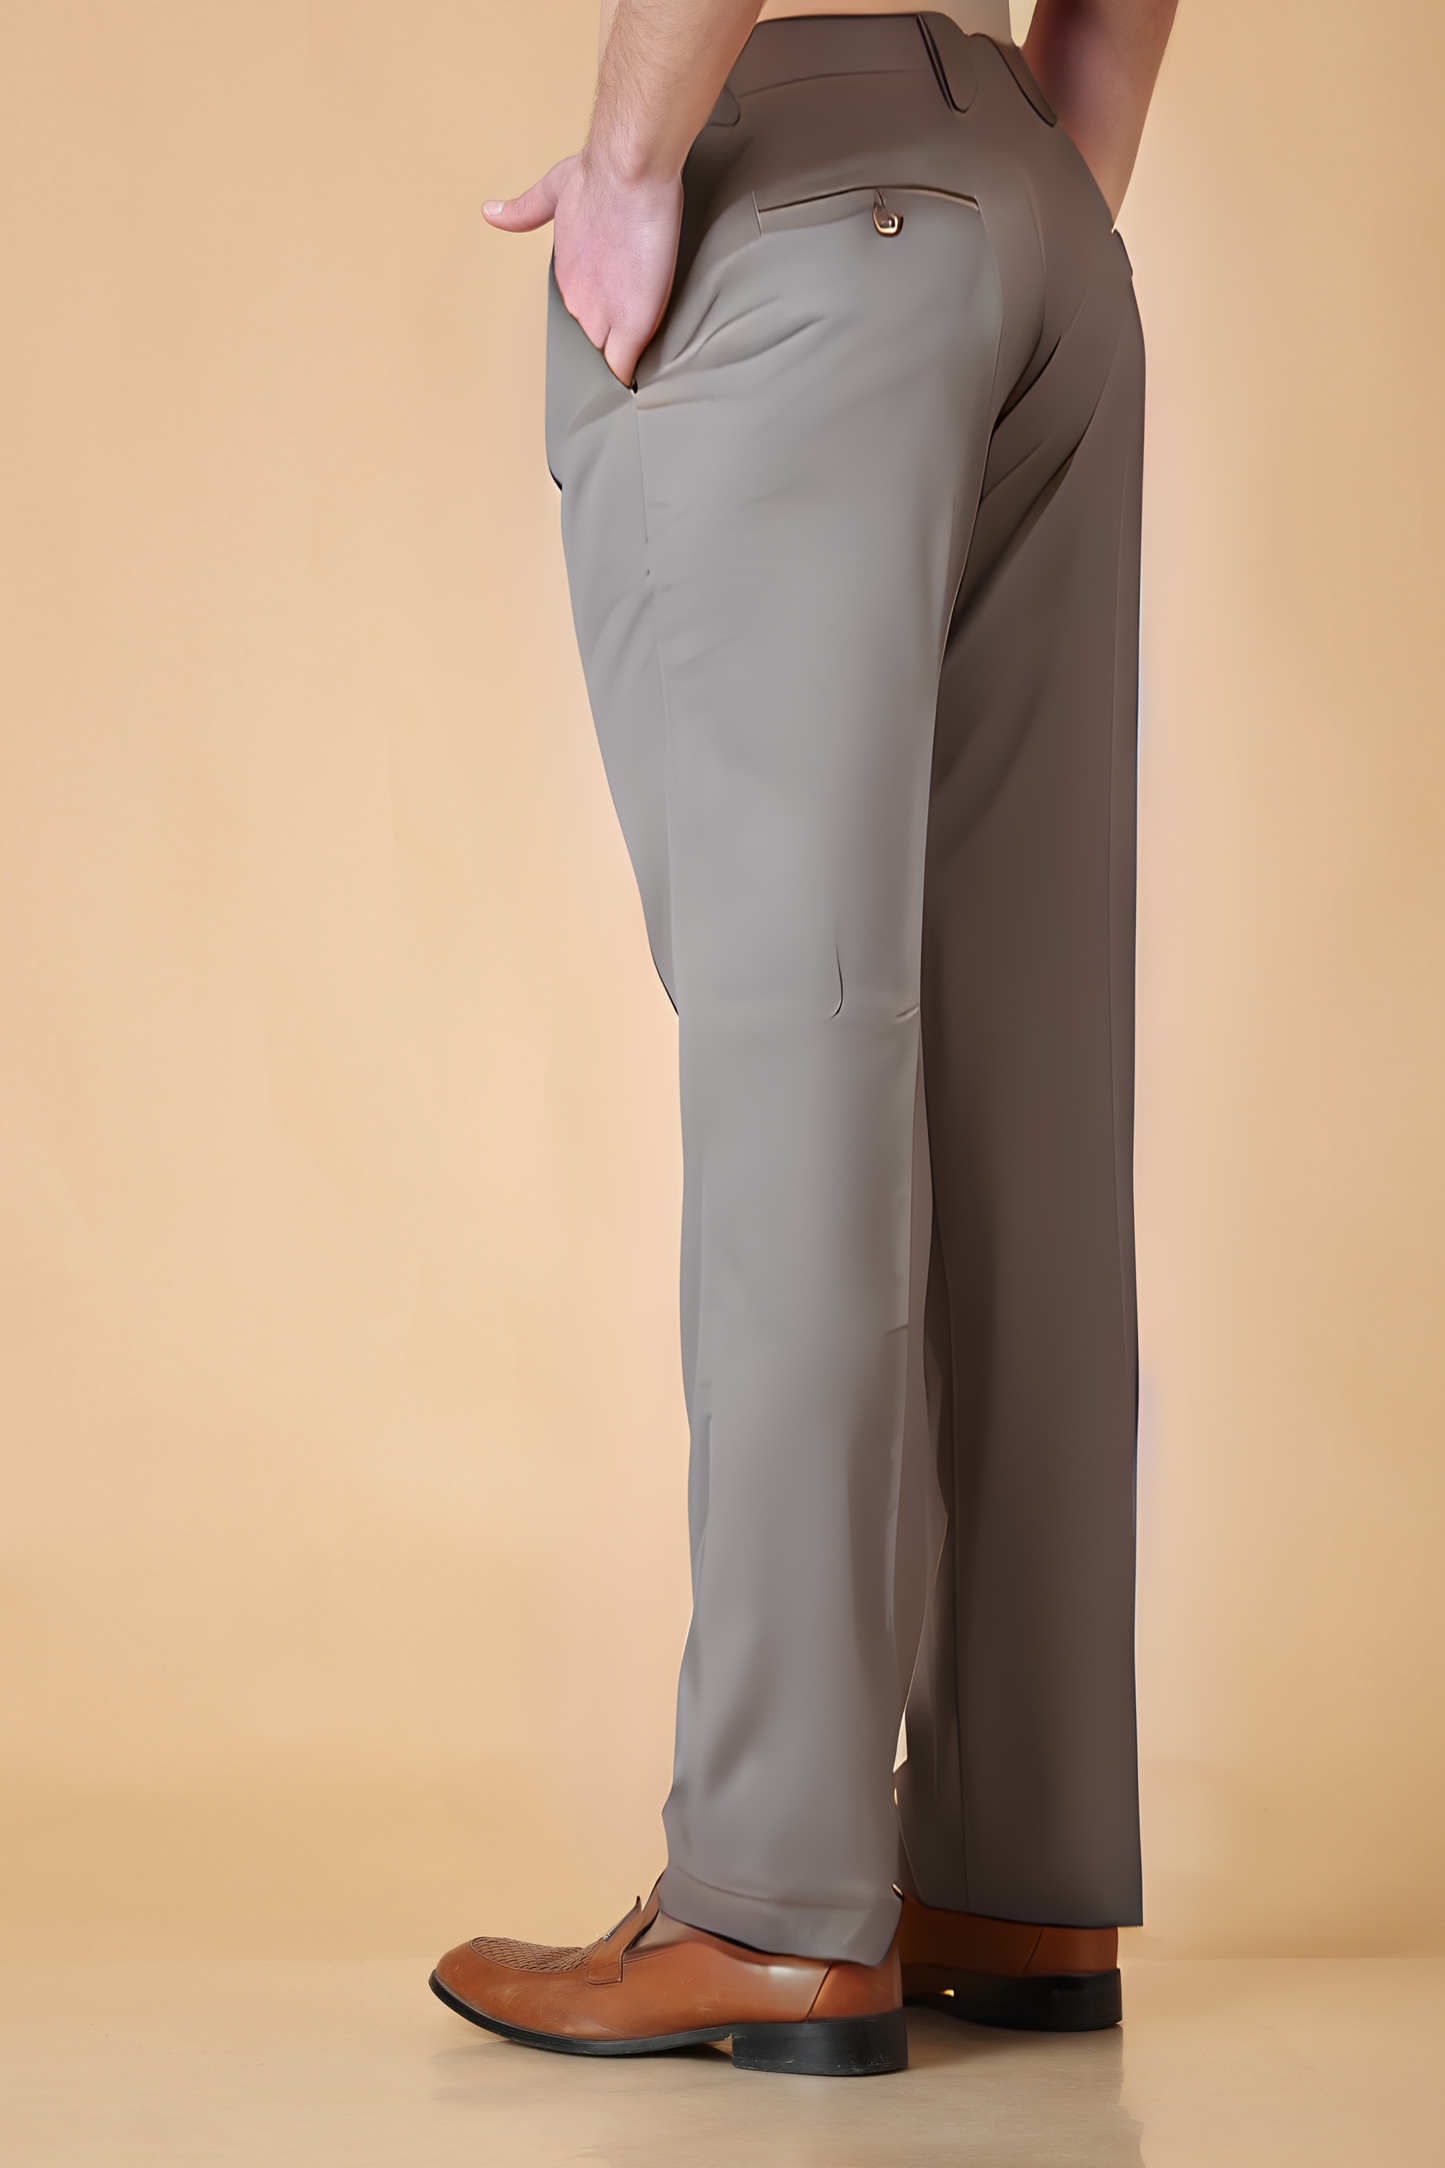 Stretchable Trousers For Mens